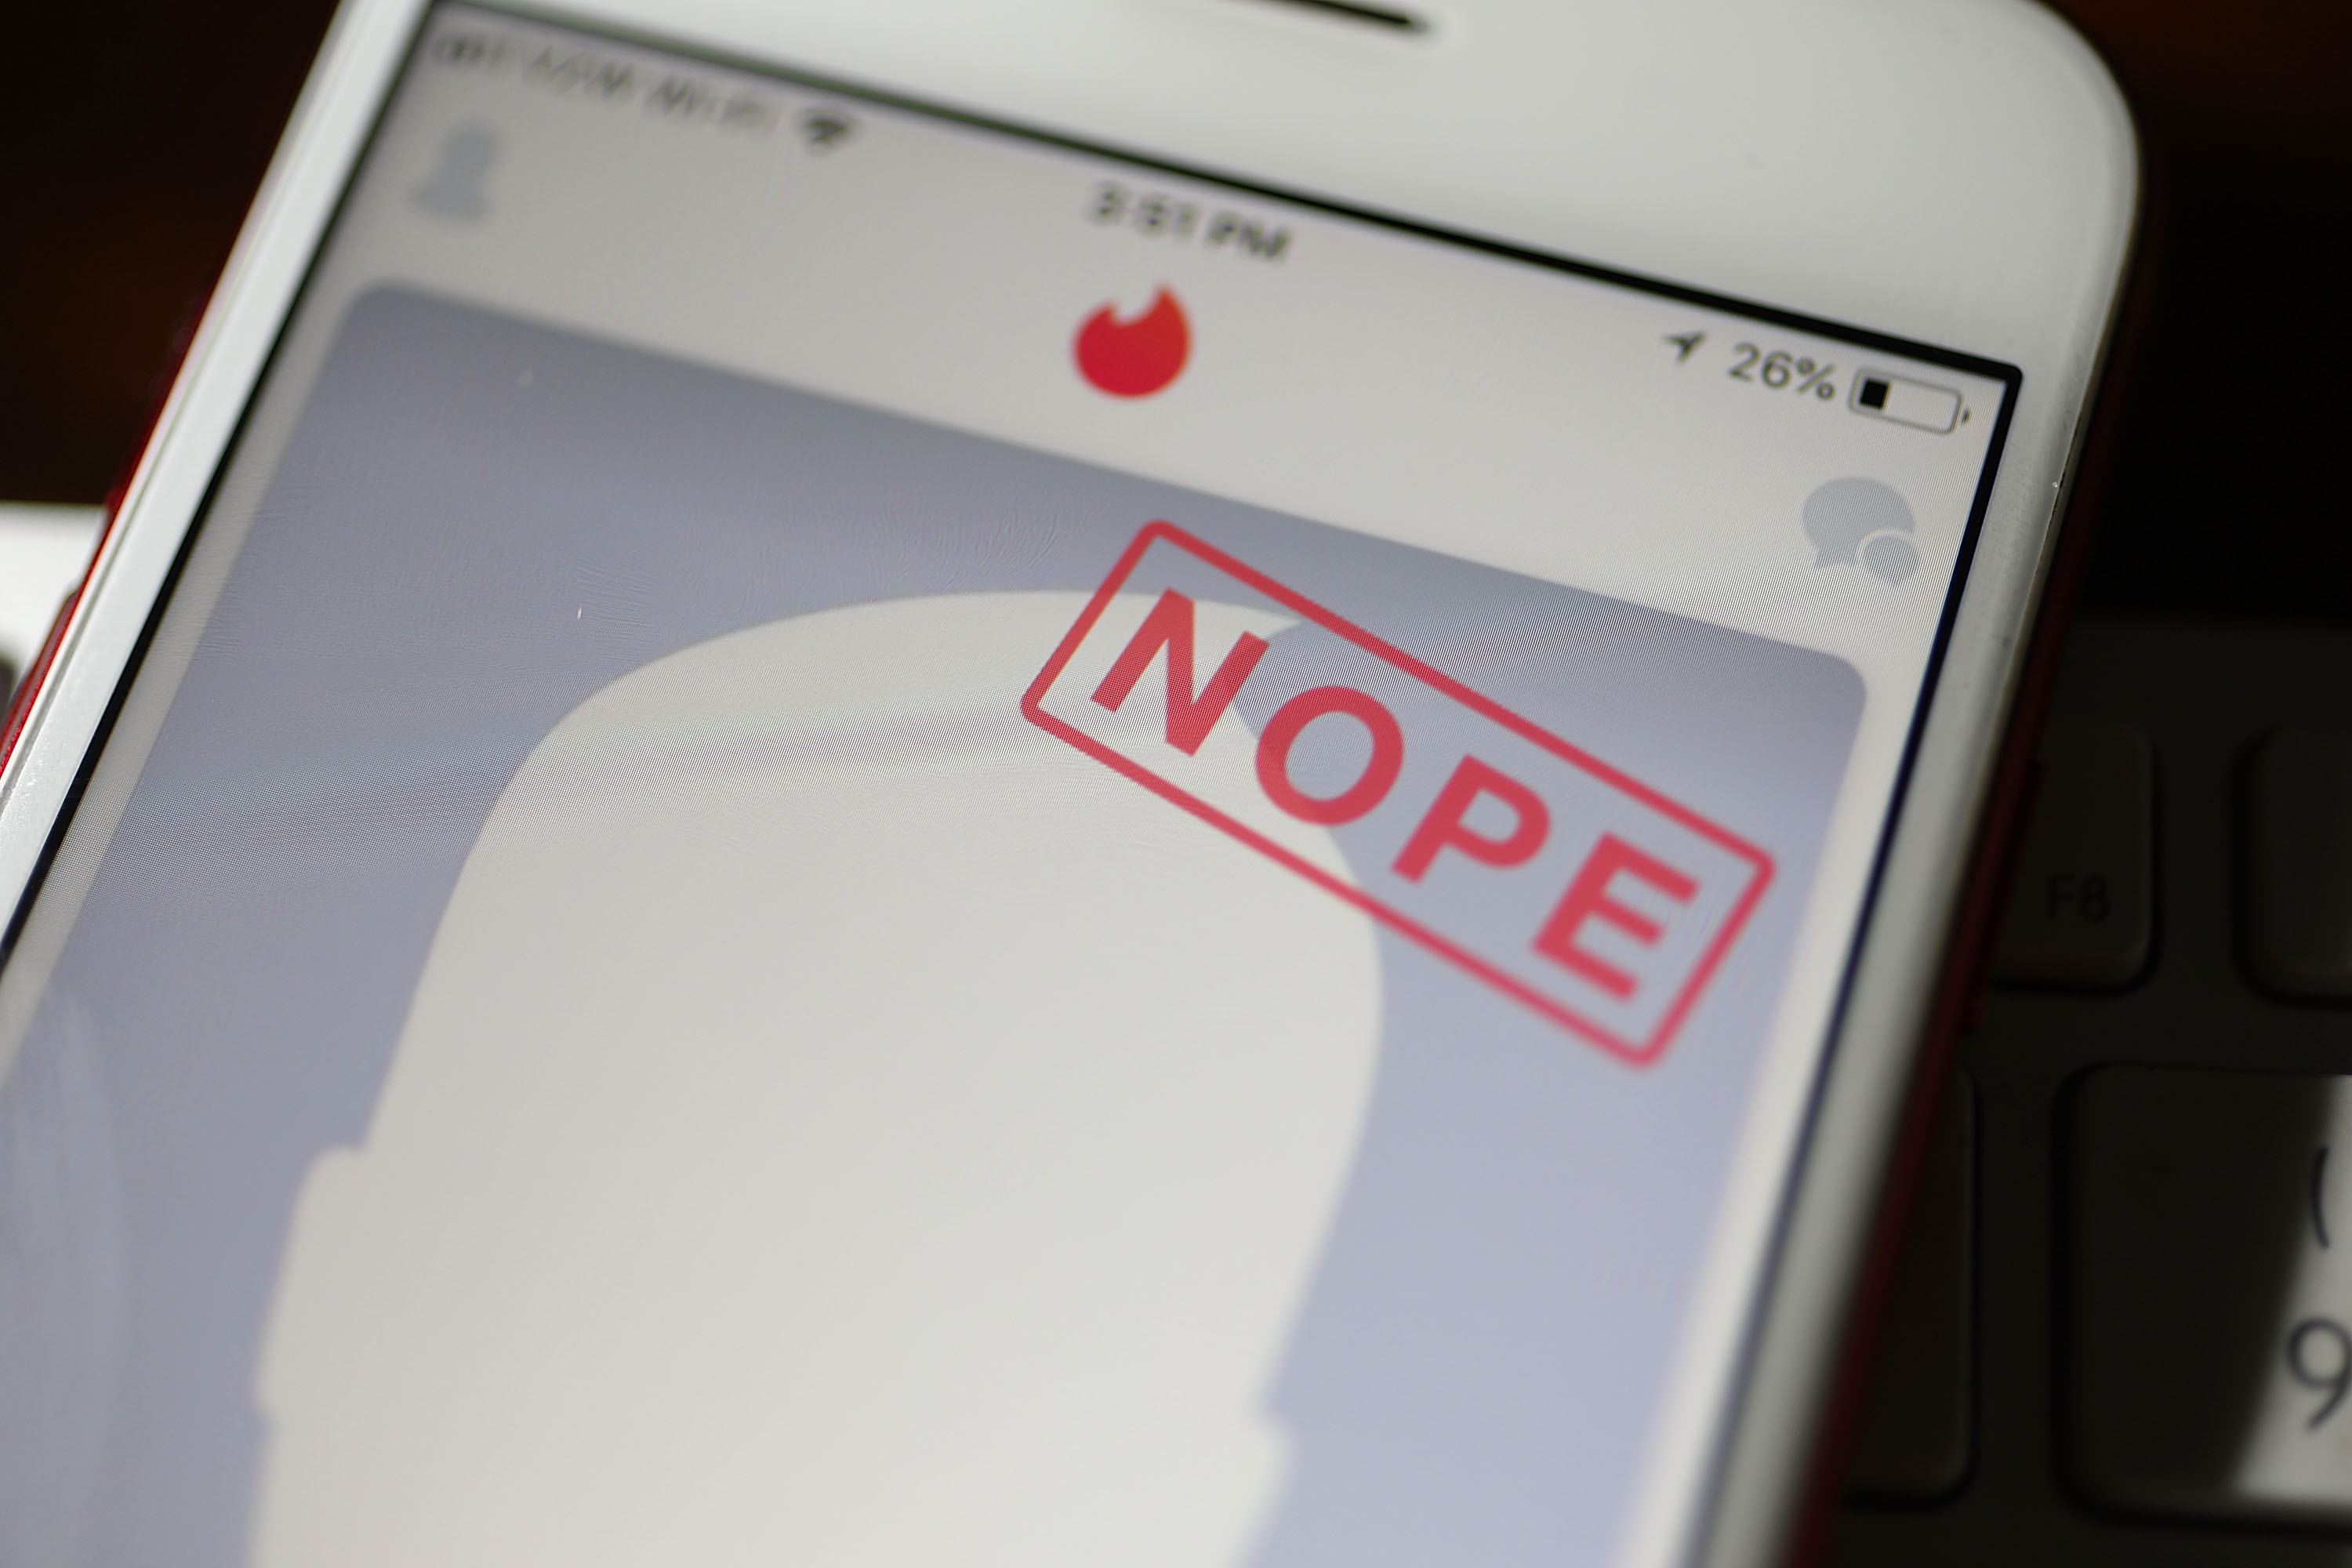 Tinder Is Using AI to Flag Offensive Messages - InsideHook